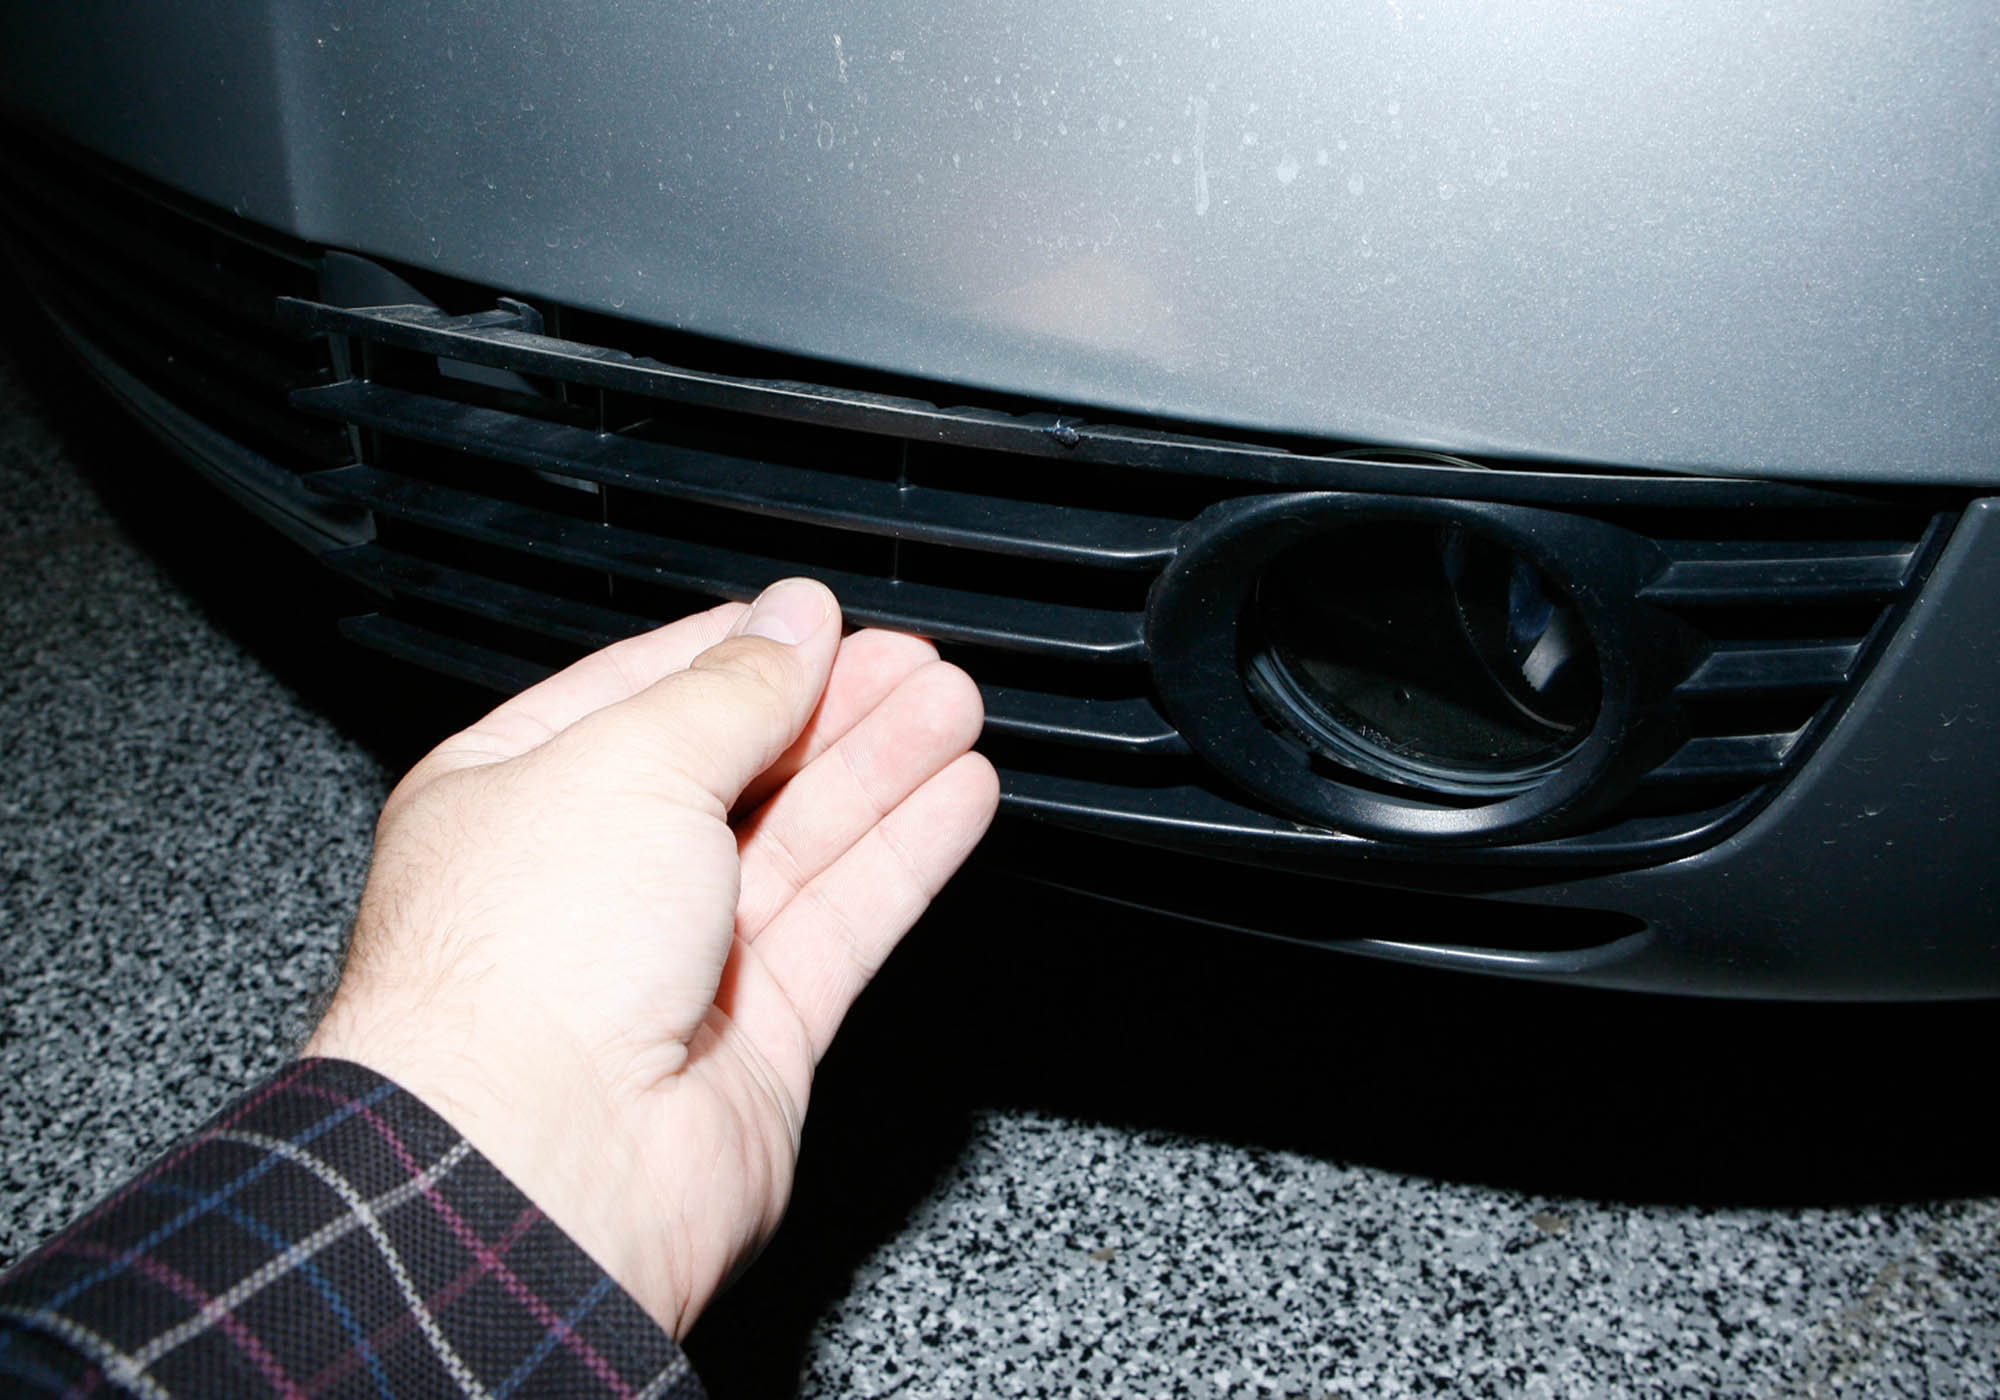 The easiest way to access the front parking light bulbs is through the front fog light grilles.